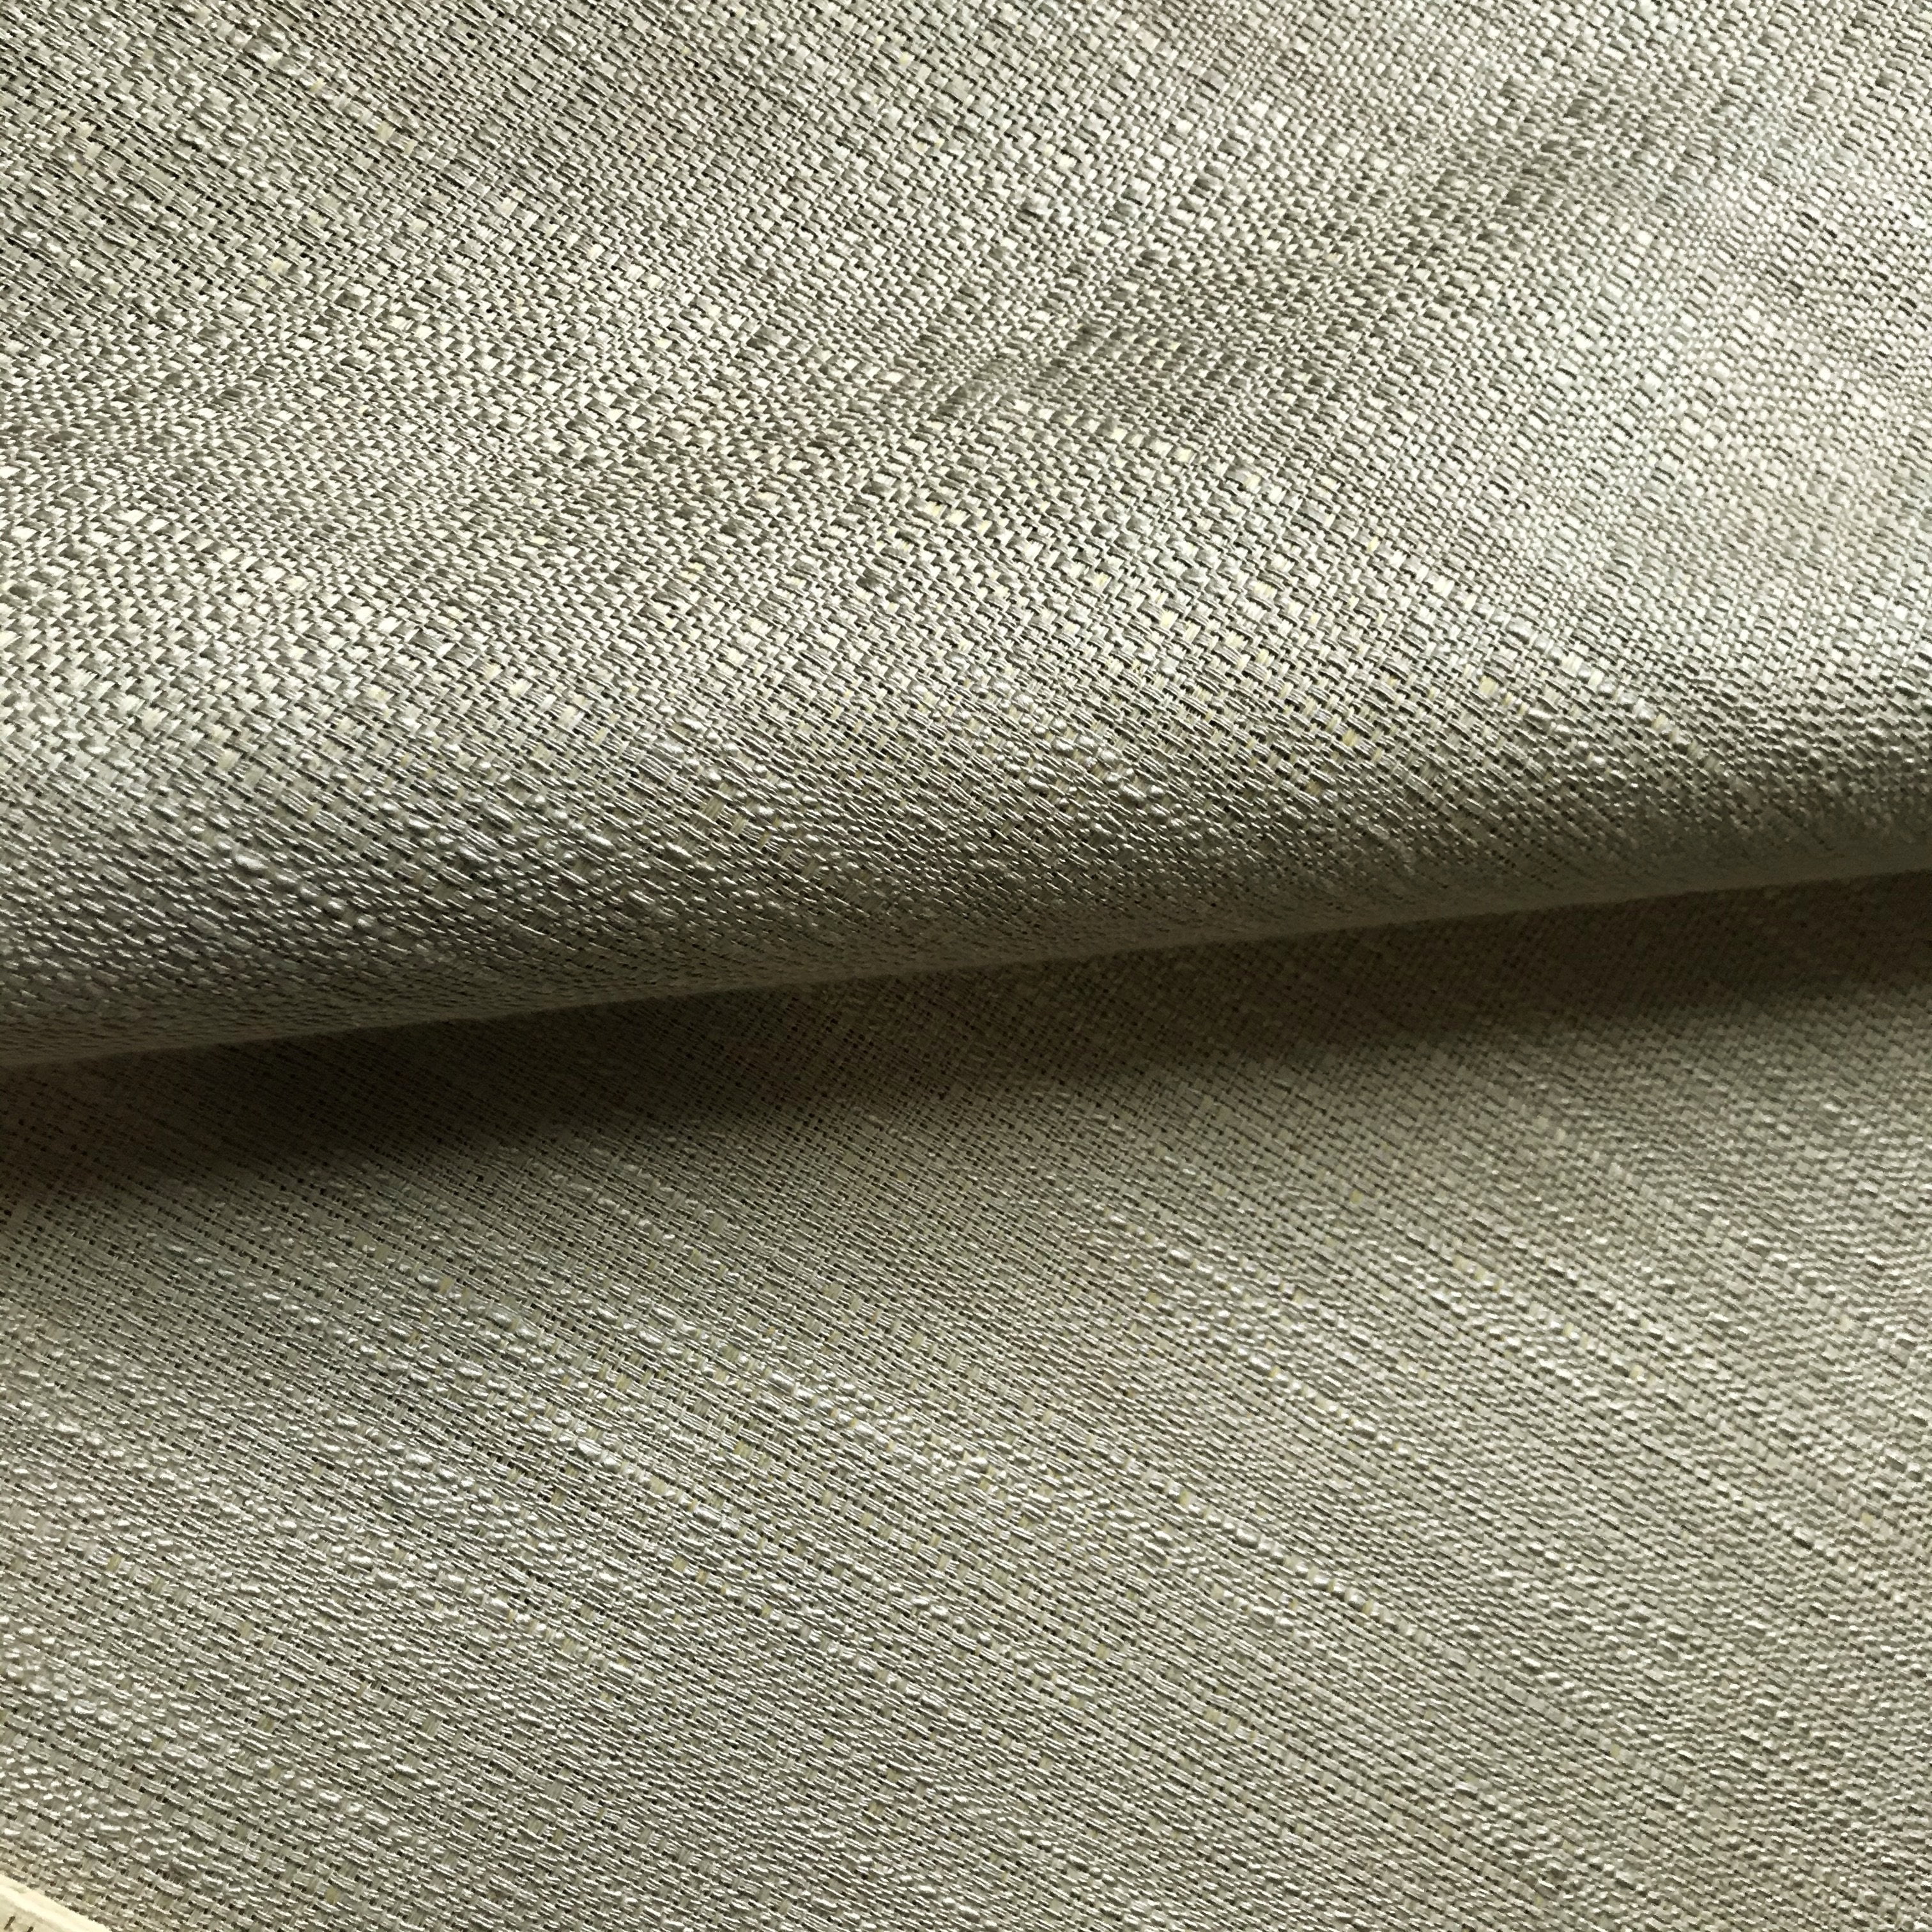 Drapery Upholstery Fabric Solid Rustic Burlap Textured Linen Fabric Natural 